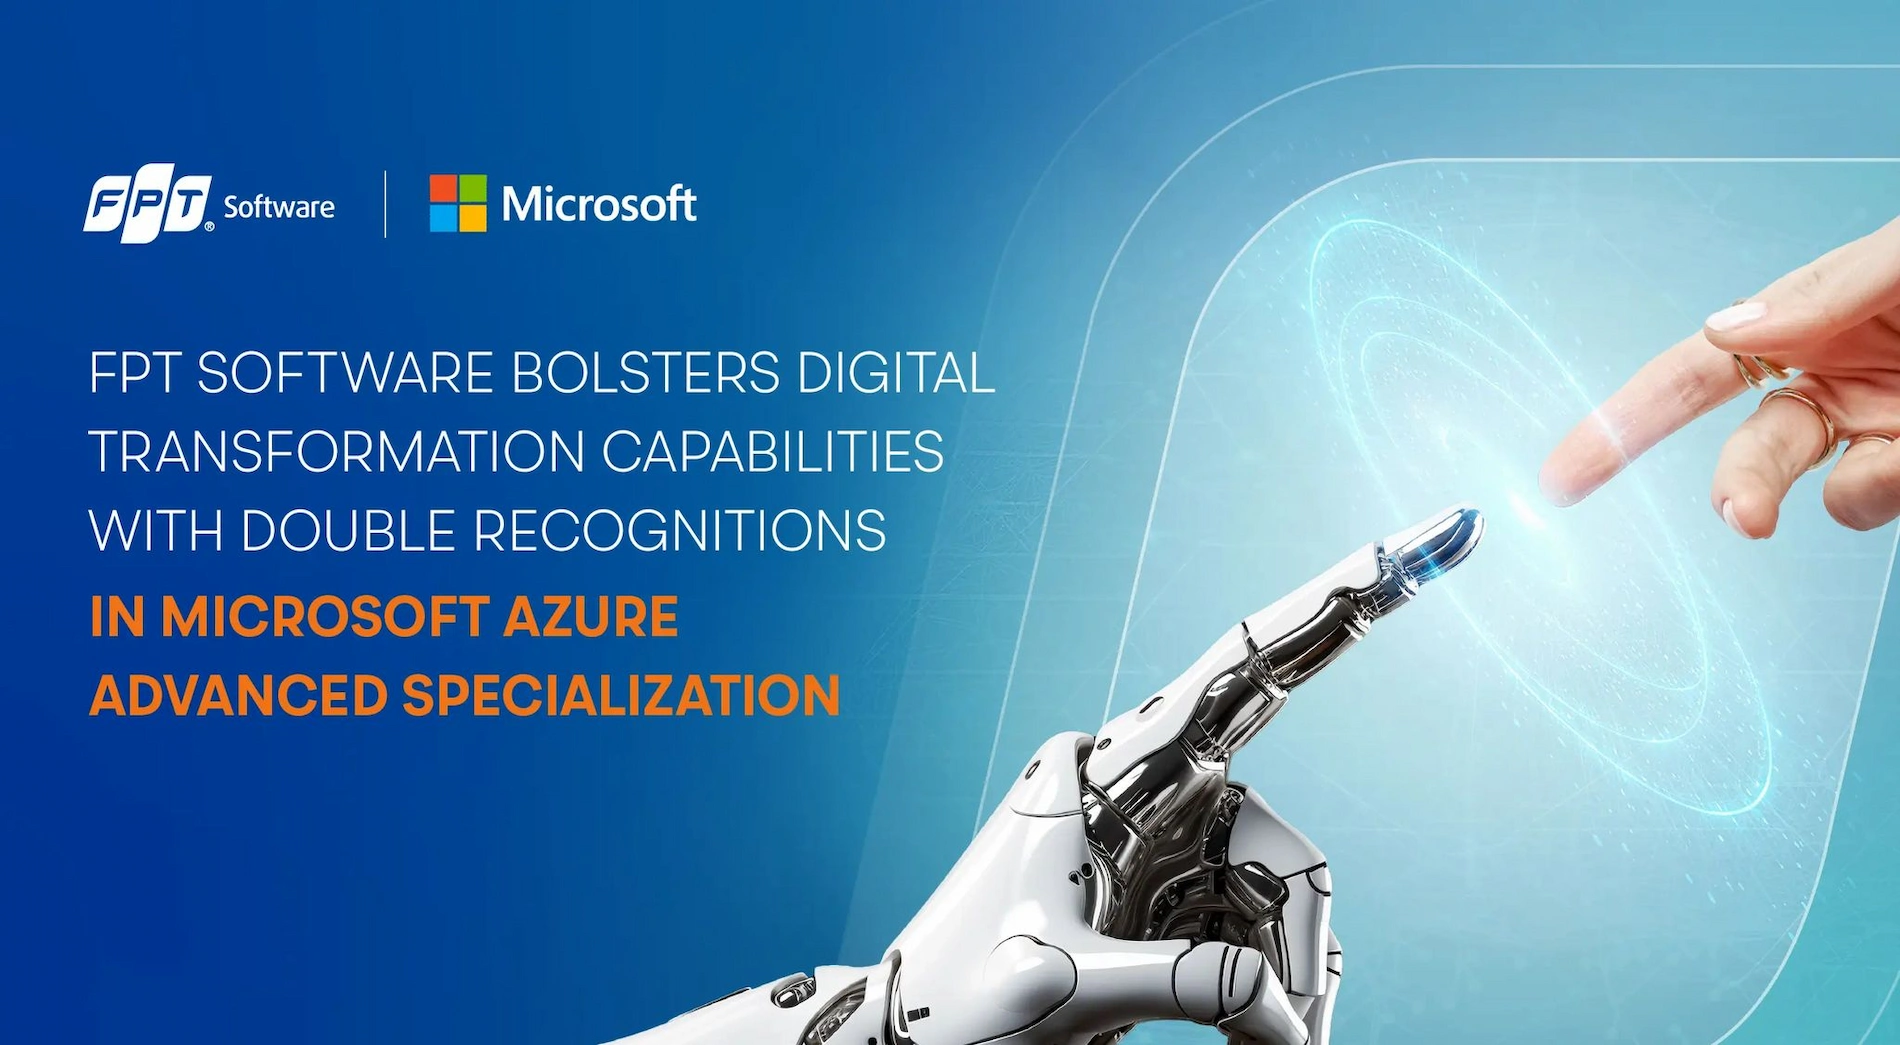 FPT Software earned double recognitions in the Microsoft Azure Specialisation Program